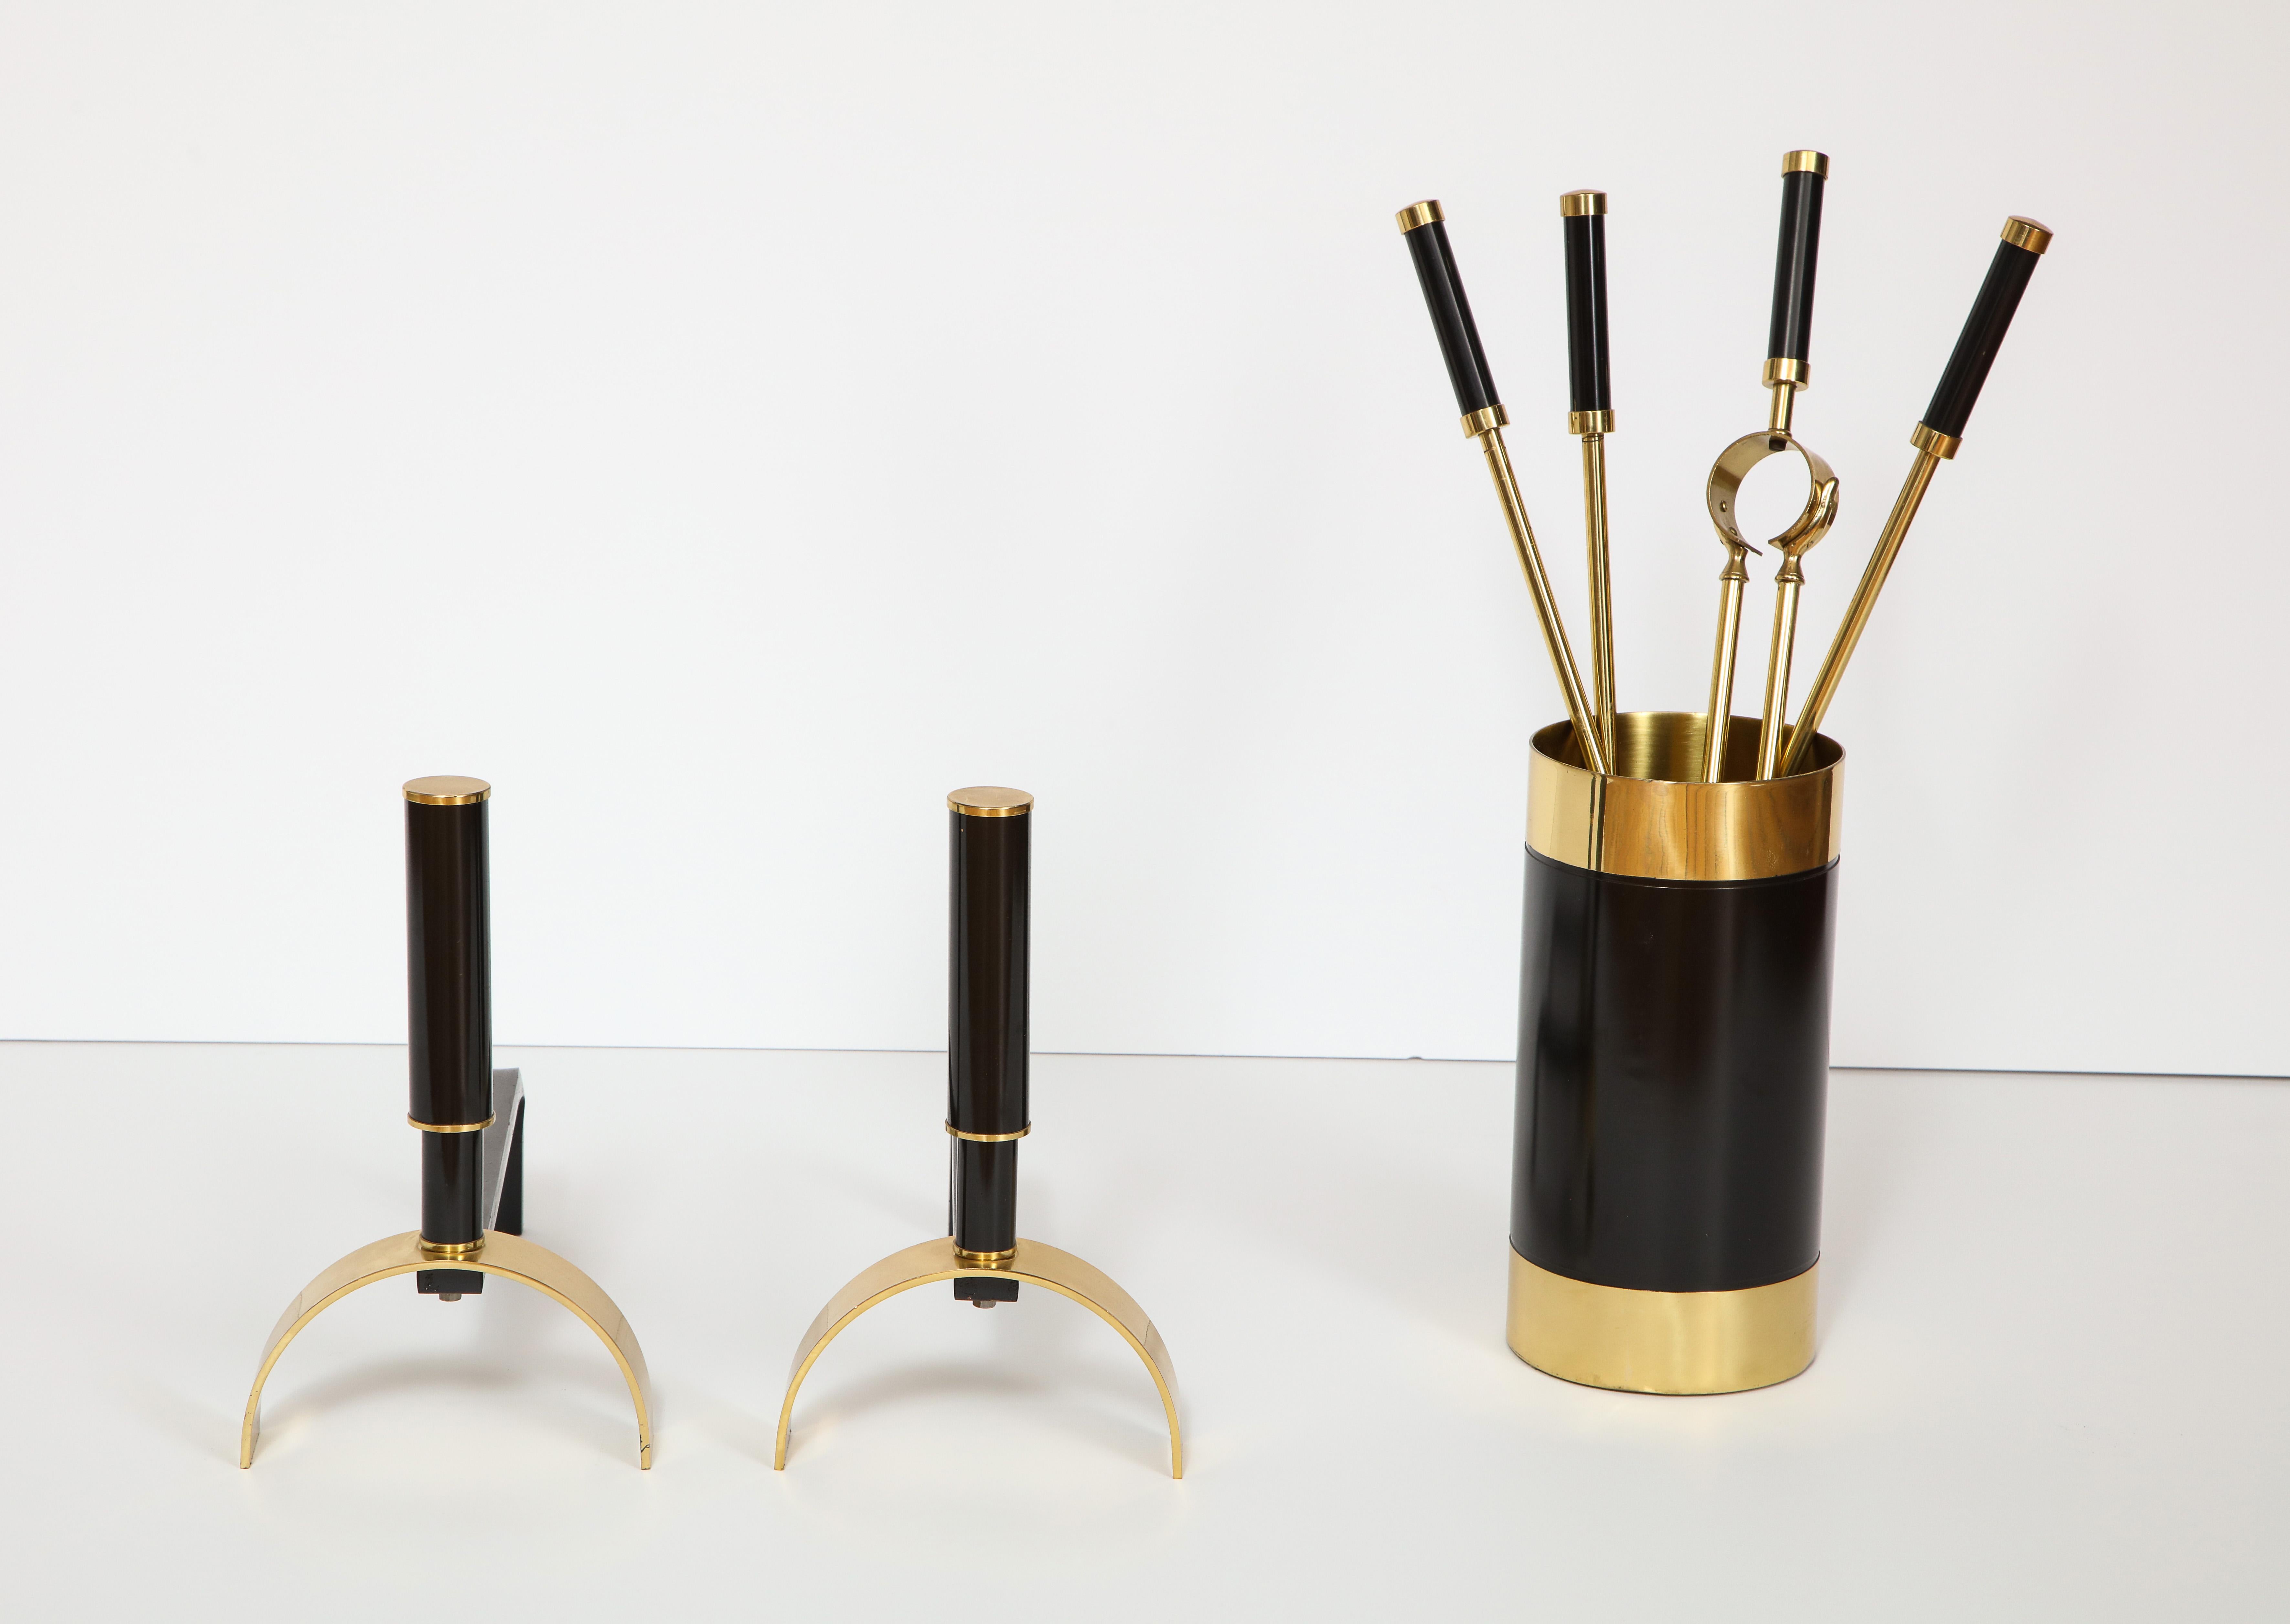 Mid-Century Modern brass and black enameled steel fireplace set which includes andirons, tools and Stand attributed to Giovanni Banci. Designed in Florence, Italy, circa 1970. Very modern and clean lines. On display at The Gallery at 200 Lex (at the